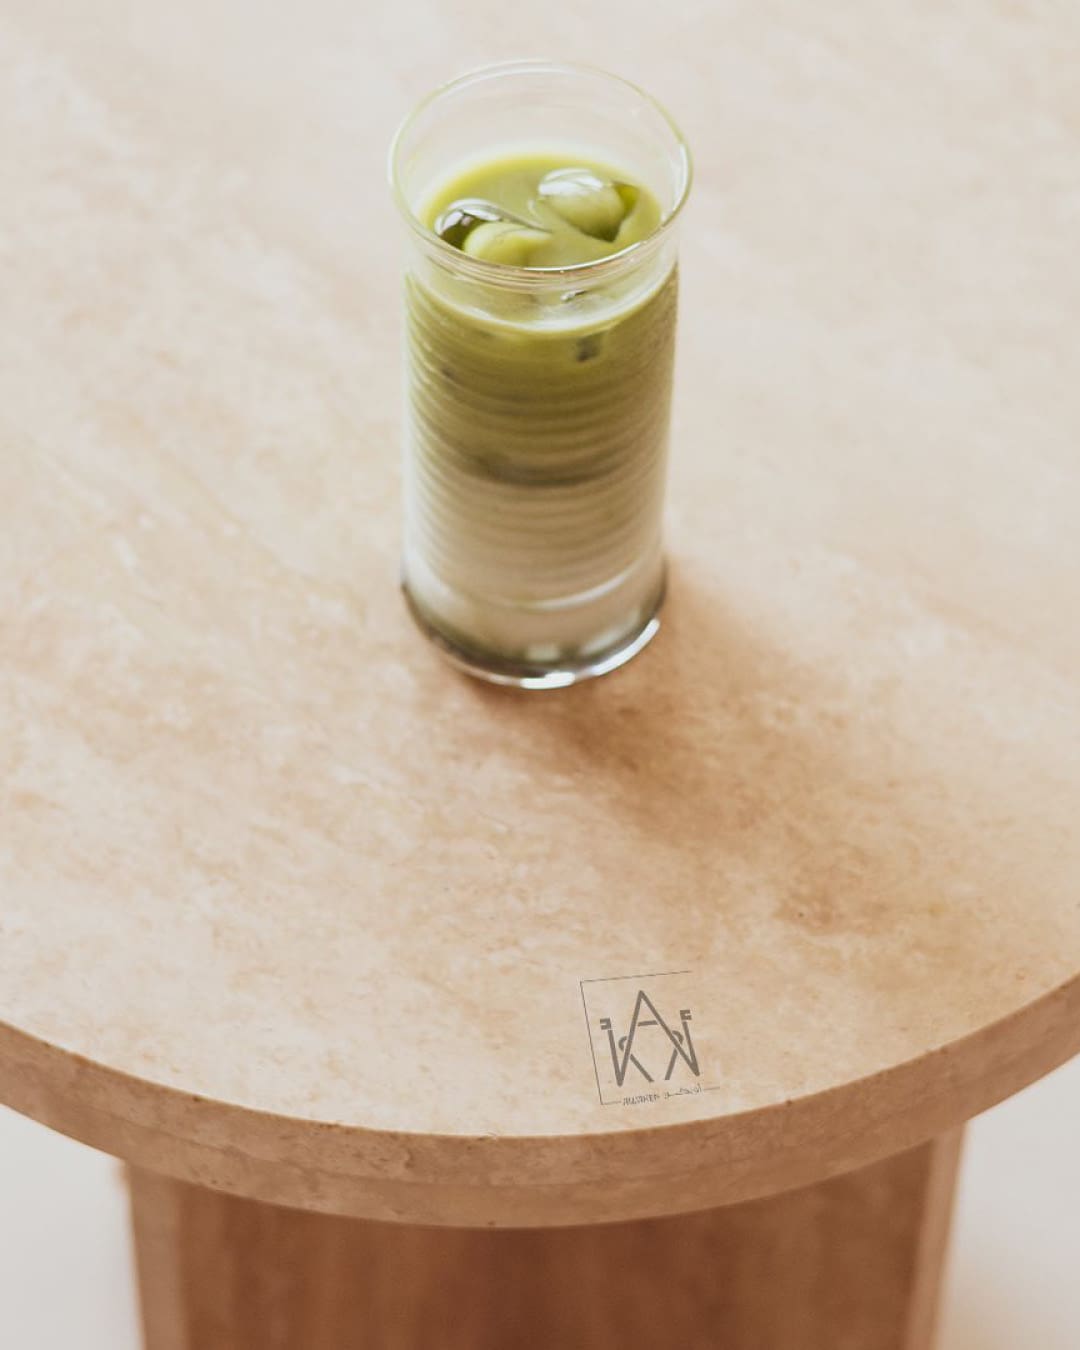 The best coffee shops in Dubai | Iced matcha latte on a wooden table